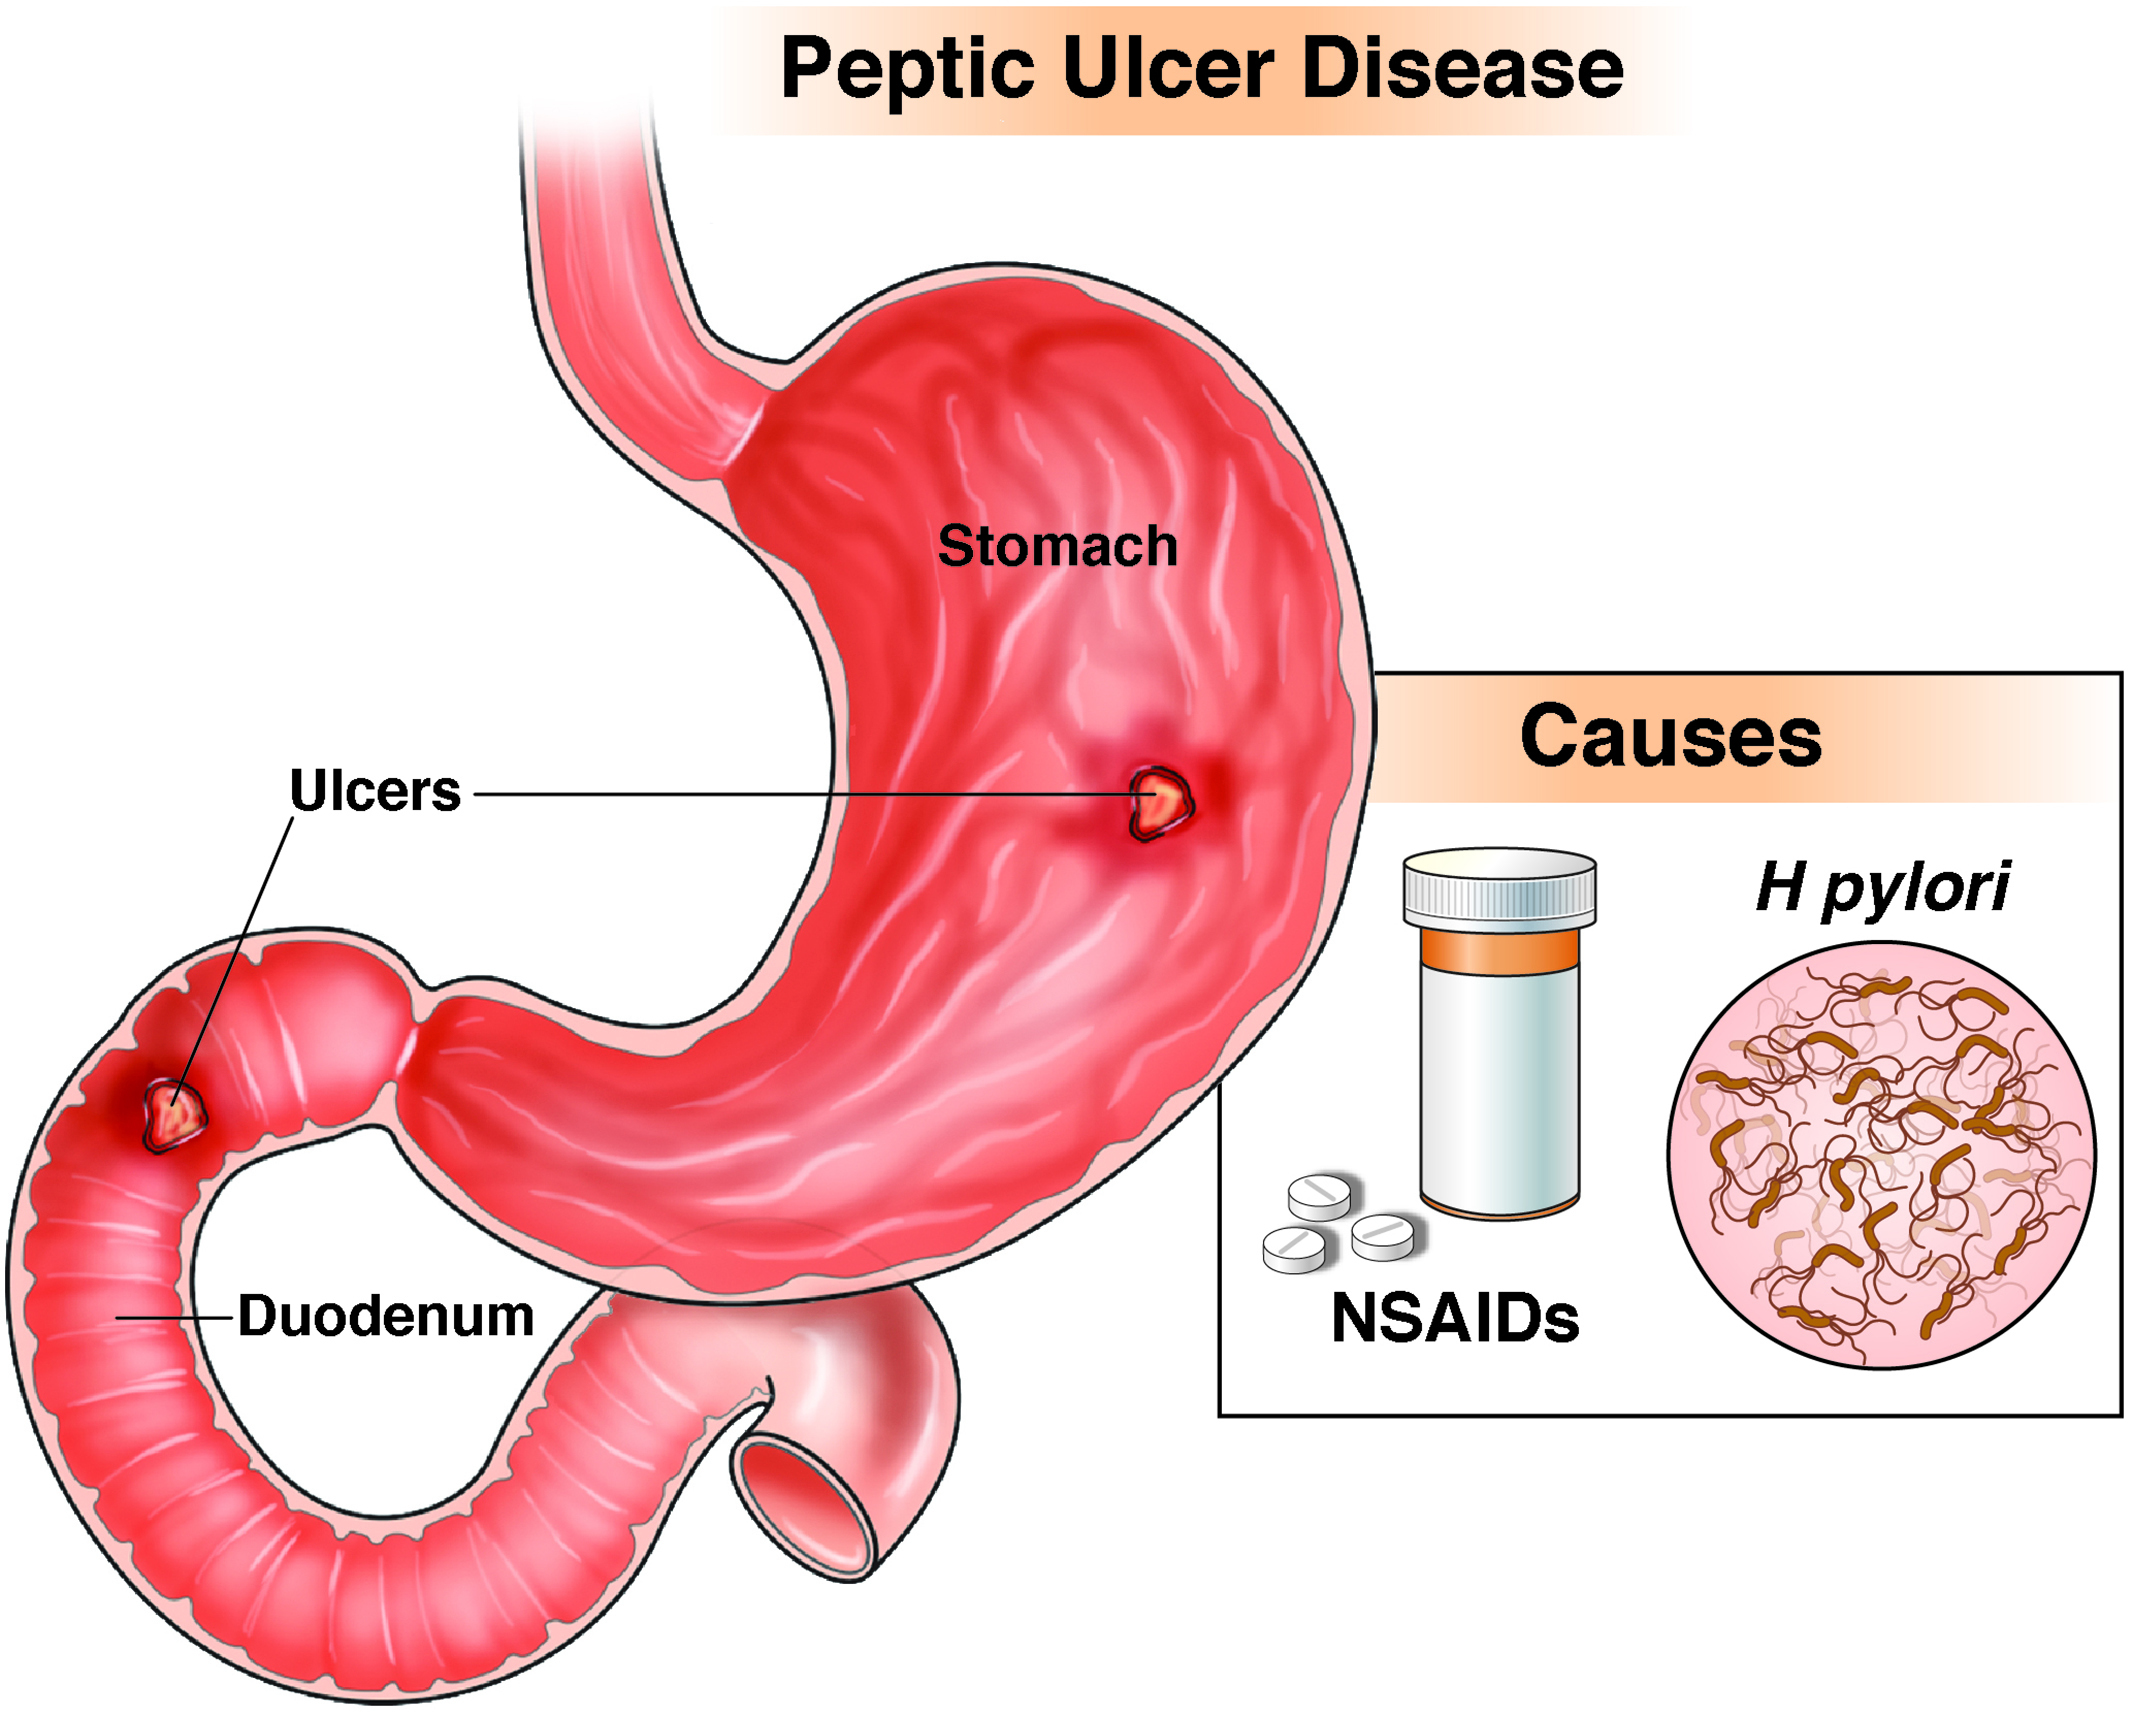 gastric ulcer types